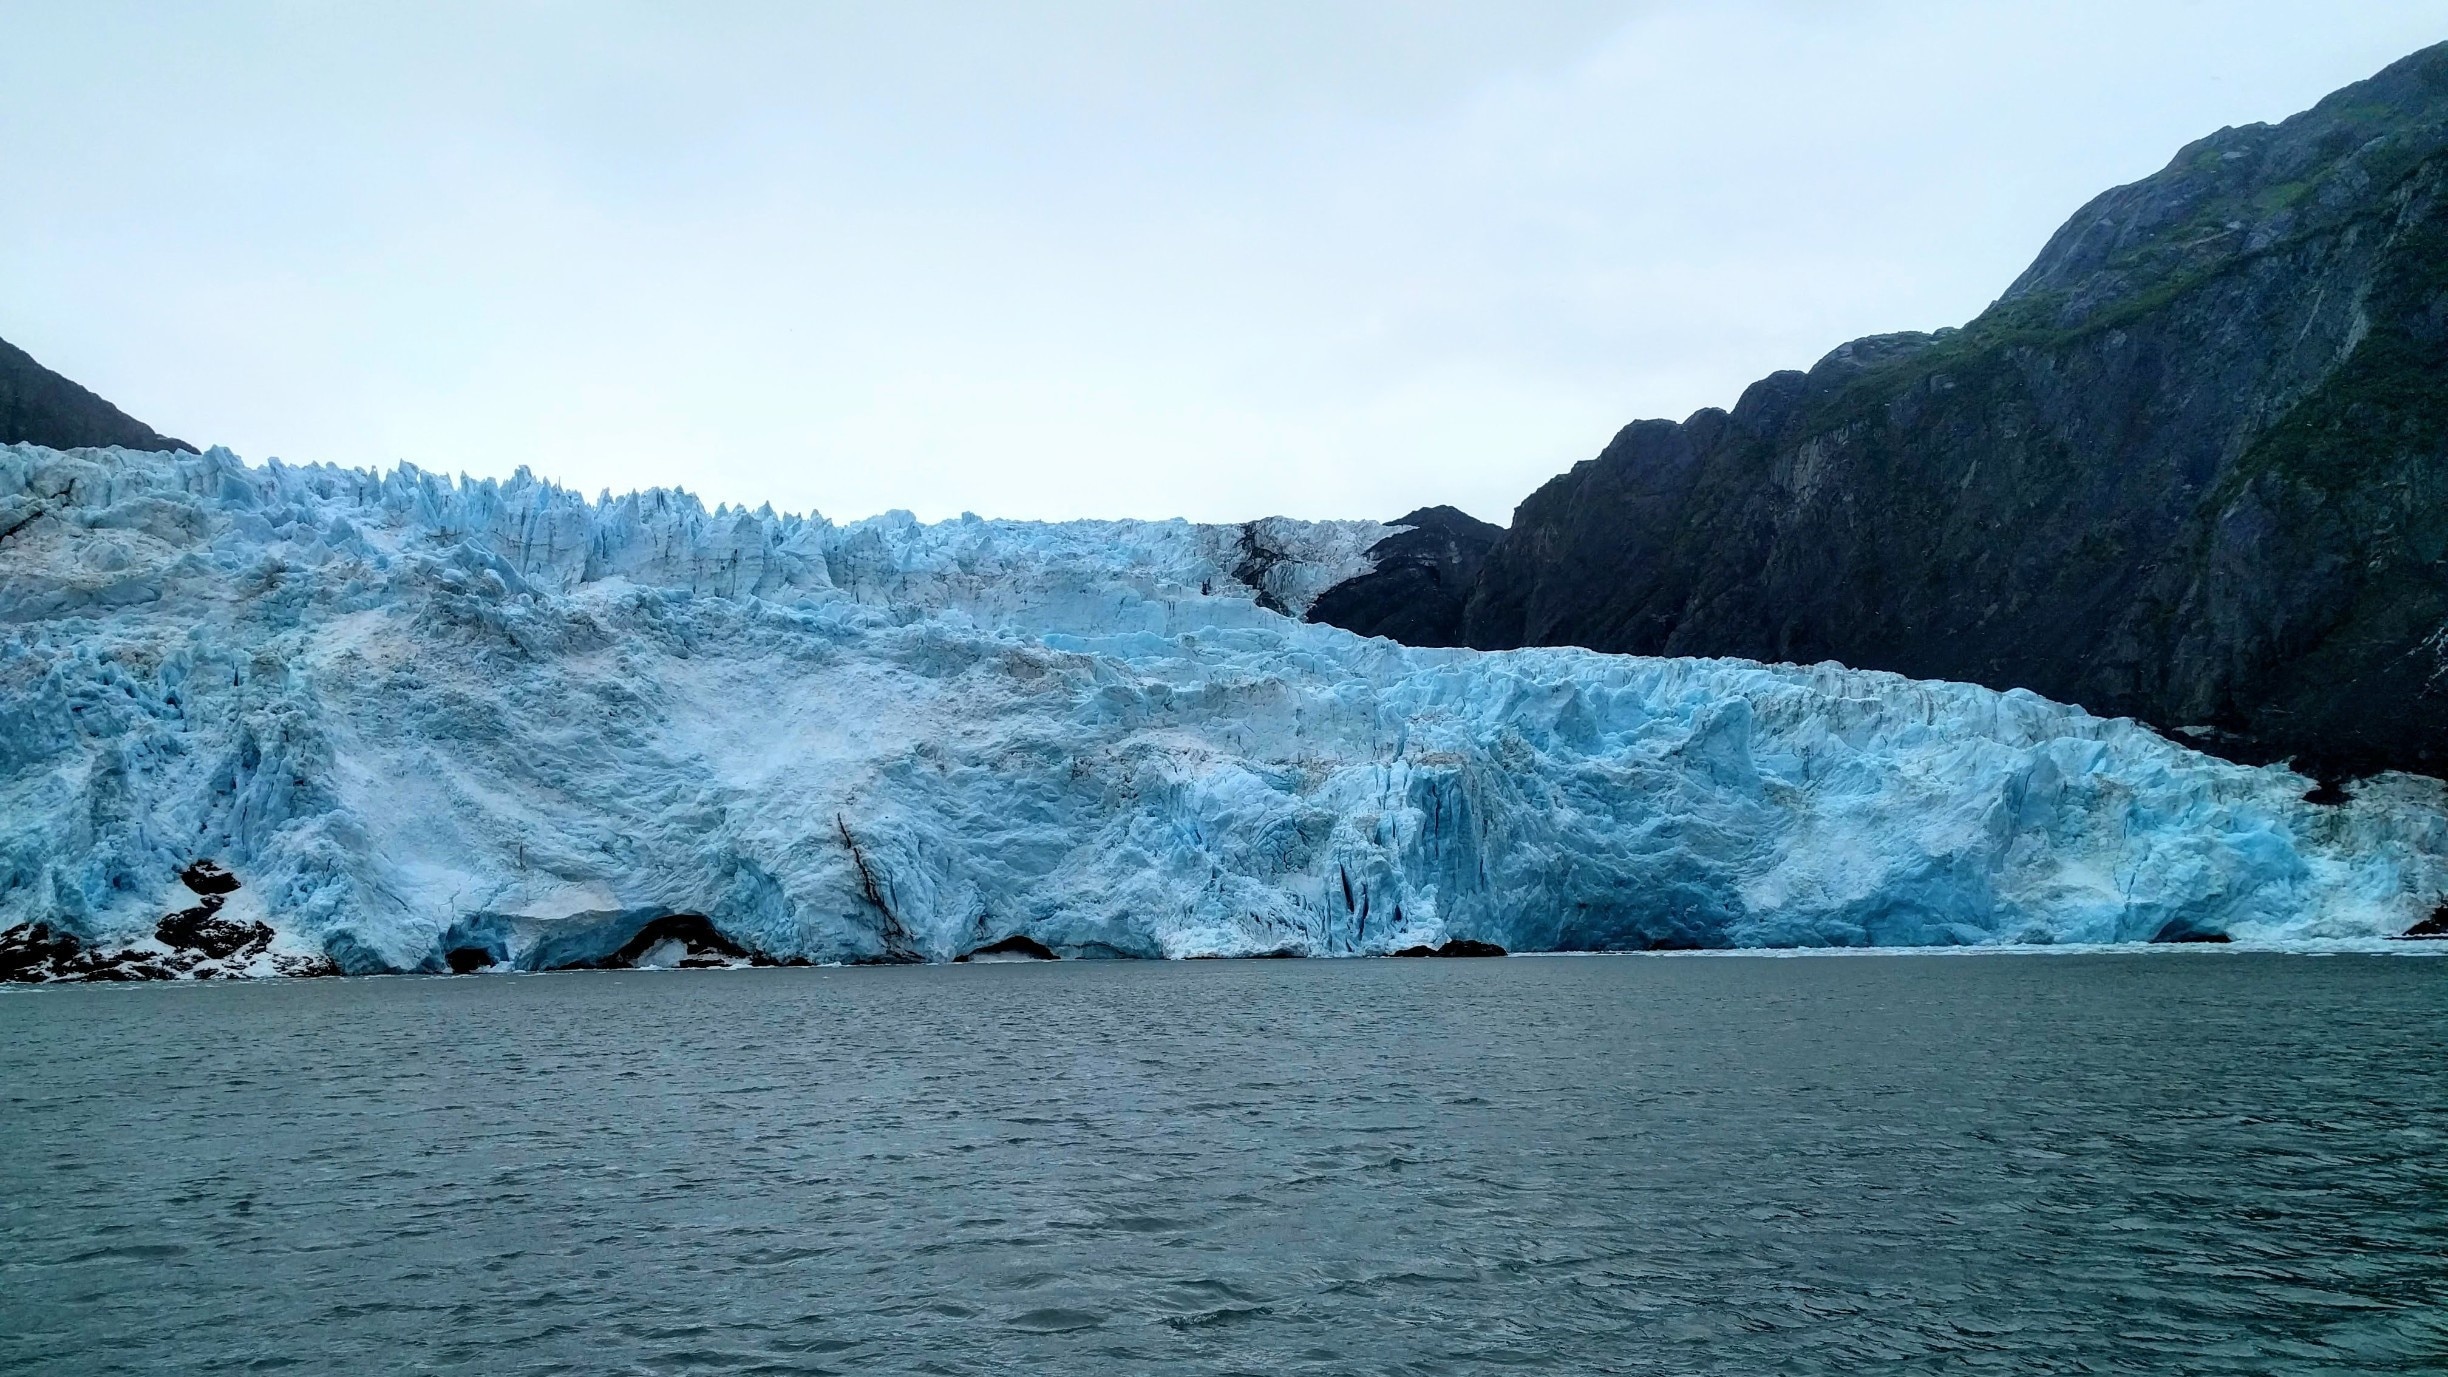 A majestic, 500 foot tall, mountain of a glacier spotted from the Kenai Fjords tour cruise.